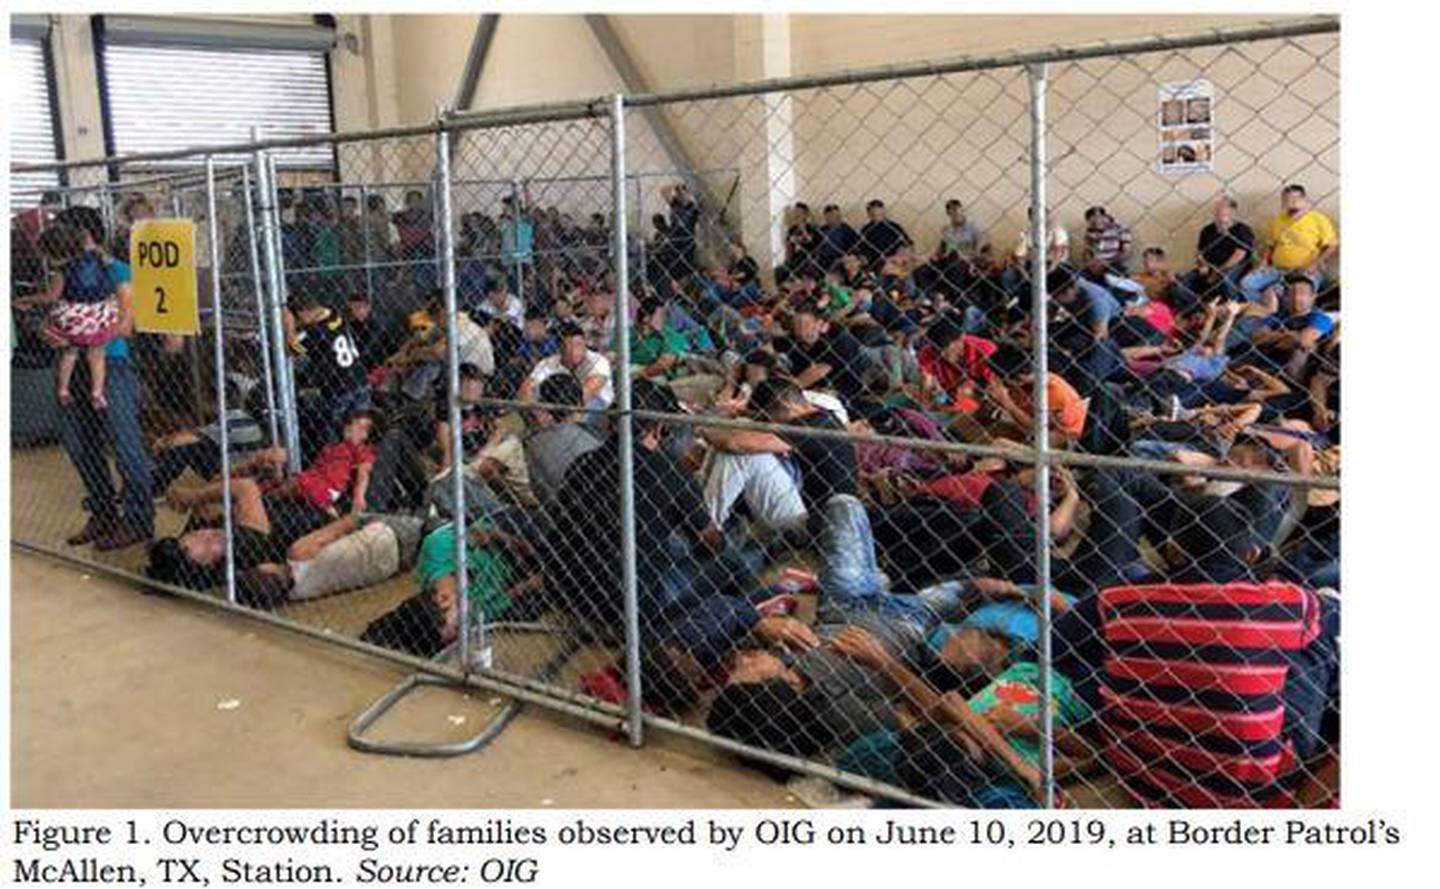 TOPSHOT - This image released in a report on July 02, 2019 by the US Department of Homeland Security (DHS) Inspector General Office (OIG) shows migrant families overcrowding a Border Patrol facility on June 10, 2019 in McAllen, texas. - The report by the DHS inspector general said the health and security of both migrants and US Customs and Border Protection (CBP) officials is under threat "We are concerned that overcrowding and prolonged detention represent an immediate risk to the health and safety of DHS agents and officers, and to those detained. " (Photo by - / DHS/ Office of the Inspector General / AFP) / RESTRICTED TO EDITORIAL USE - MANDATORY CREDIT "AFP PHOTO / DHS Inspector General Office" - NO MARKETING - NO ADVERTISING CAMPAIGNS - DISTRIBUTED AS A SERVICE TO CLIENTS